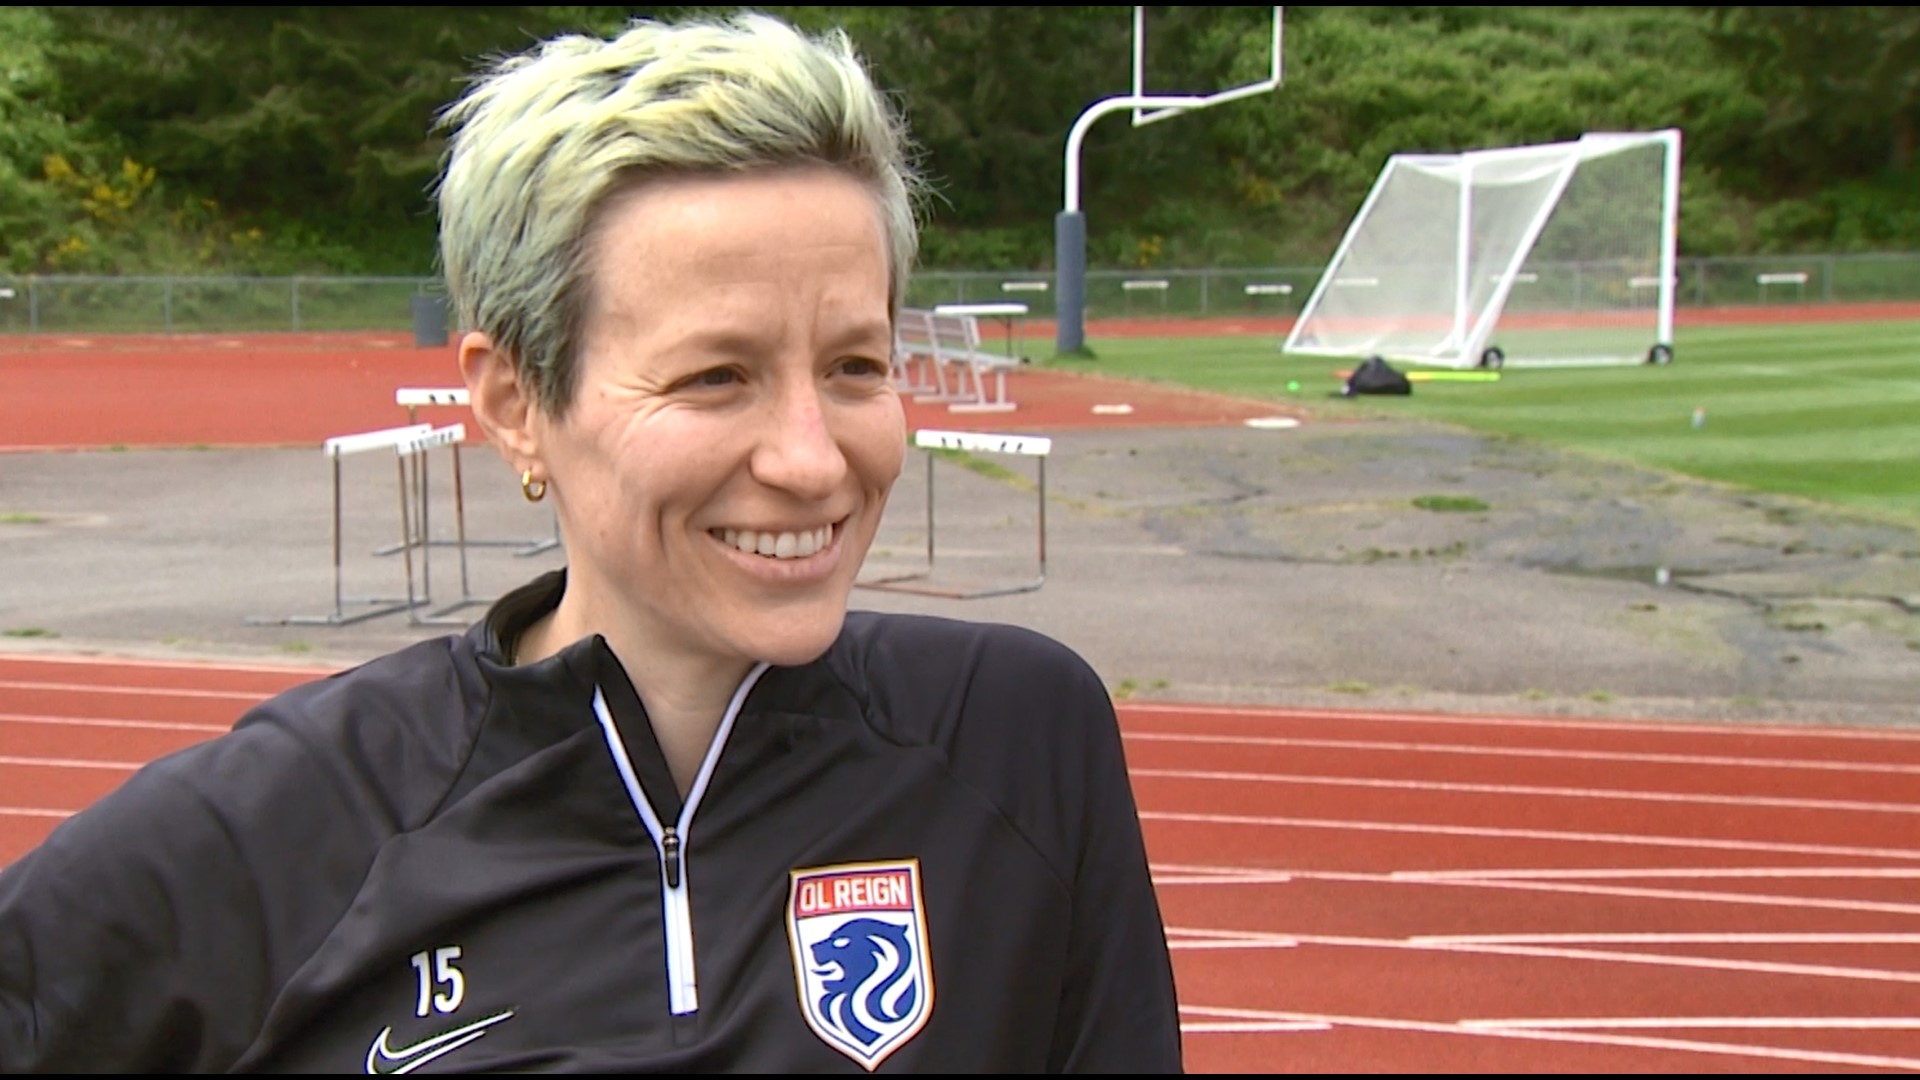 OL Reign star Megan Rapinoe has been at the forefront of the fight for equal pay.